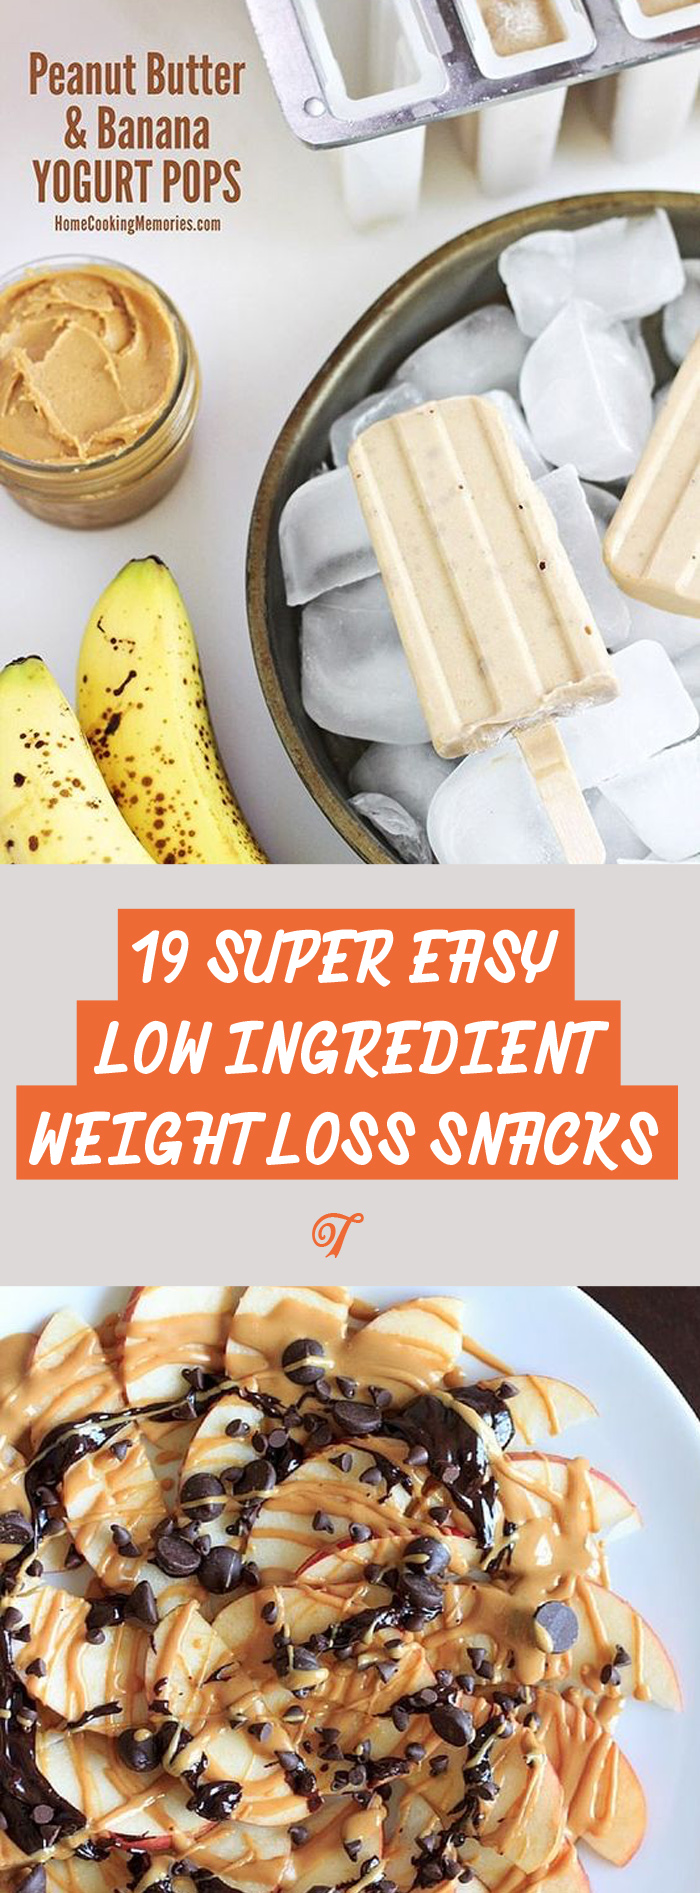 low-ingredient-weight-loss-snacks